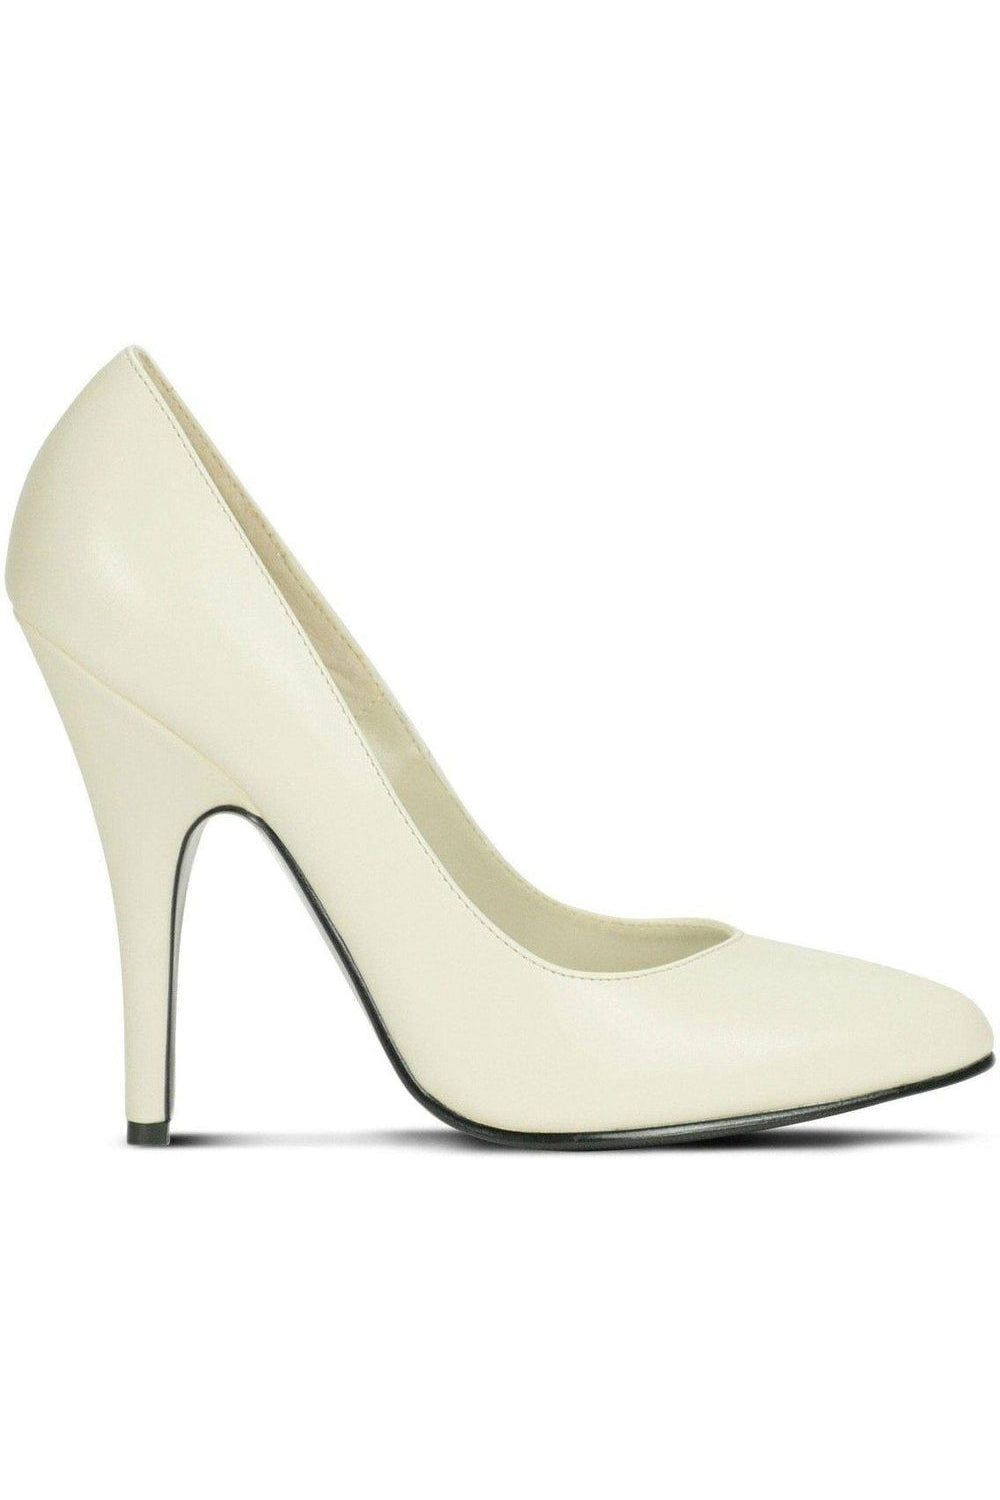 Sexy-4211 Vintage High Heel Pump | Bone Faux Leather-Sexyshoes Brand-Pumps-SEXYSHOES.COM